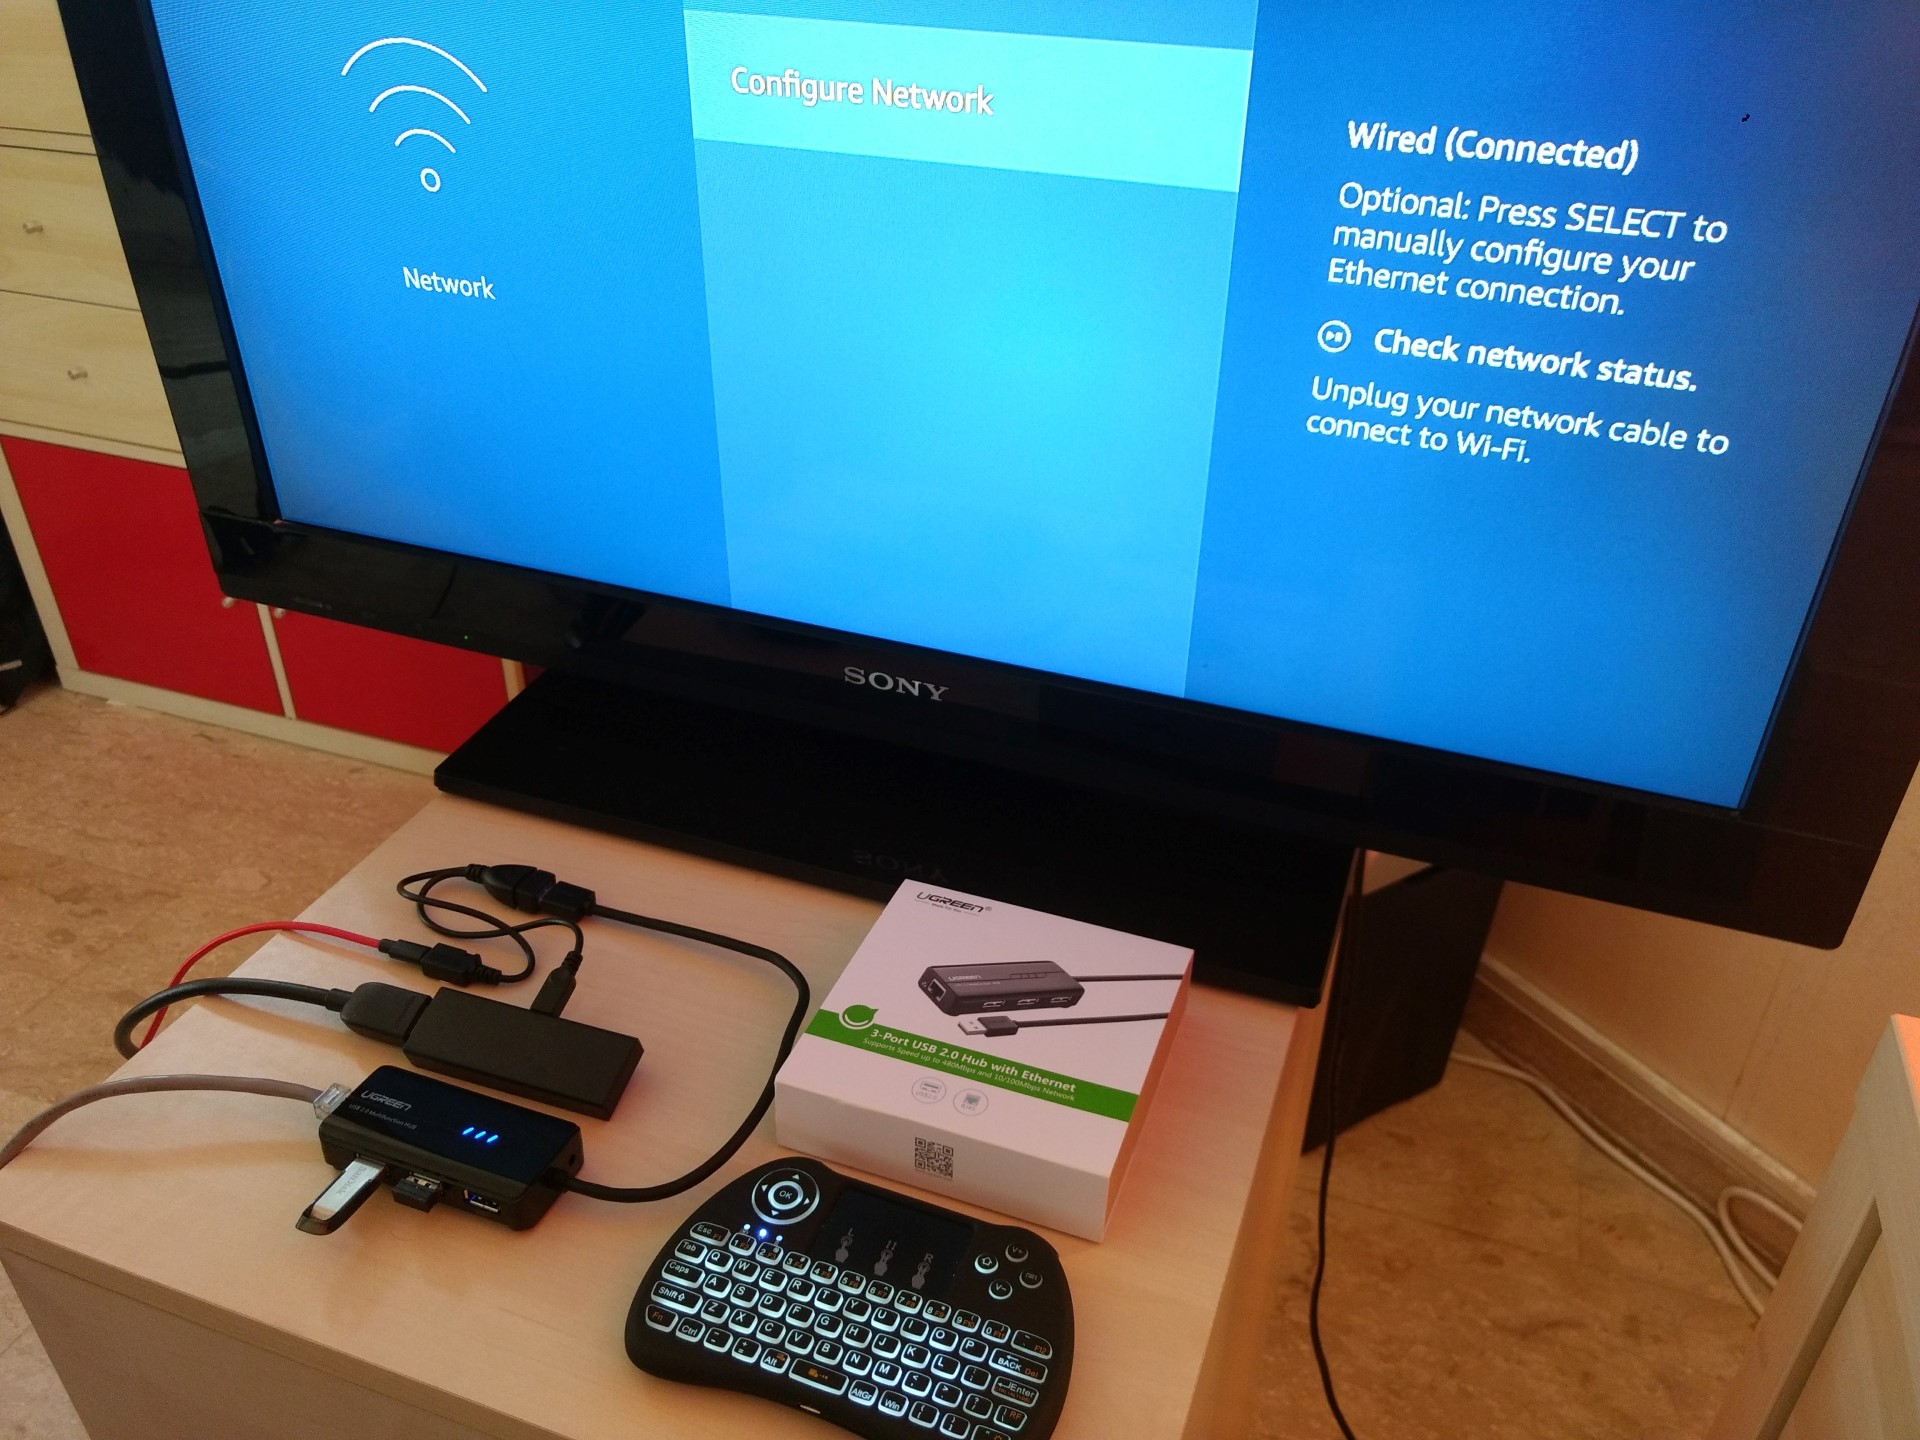 Fire TV Stick with wired Ethernet, keyboard, mouse and external storage